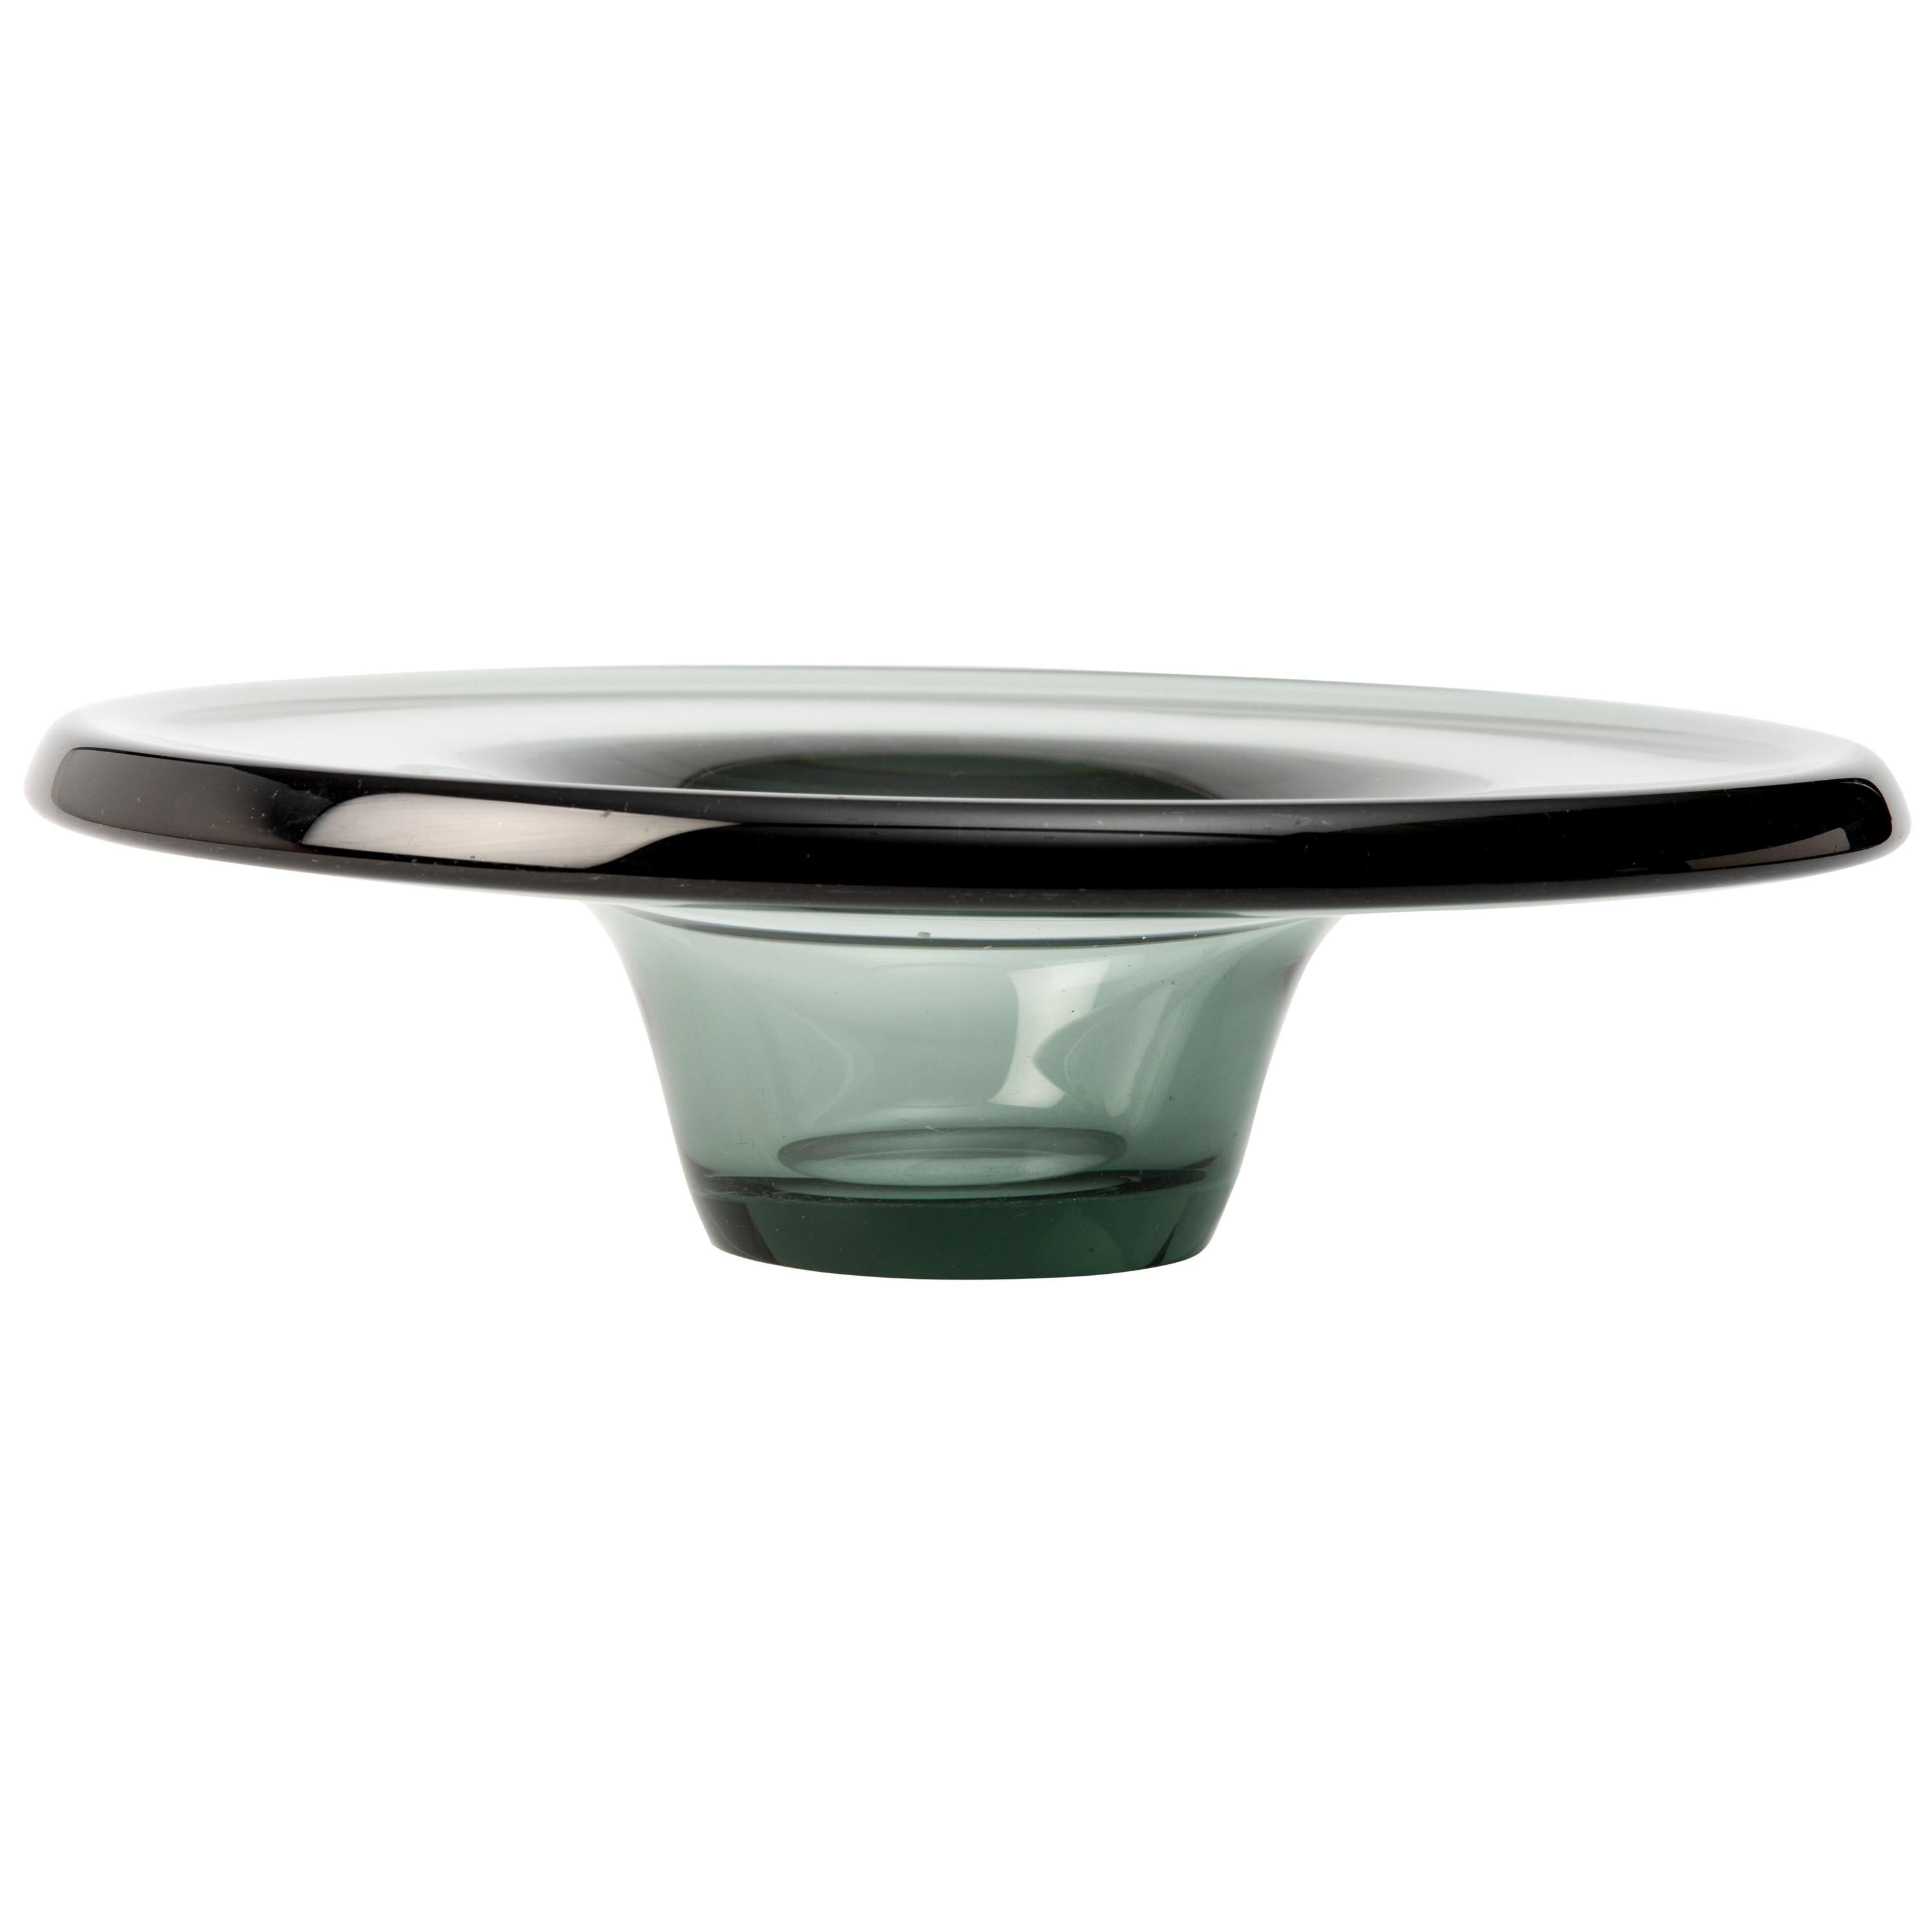 Leerdam Bowl on Small Stand with Wide Rim by A.D. Copier, 1937 for Glasfabriek For Sale